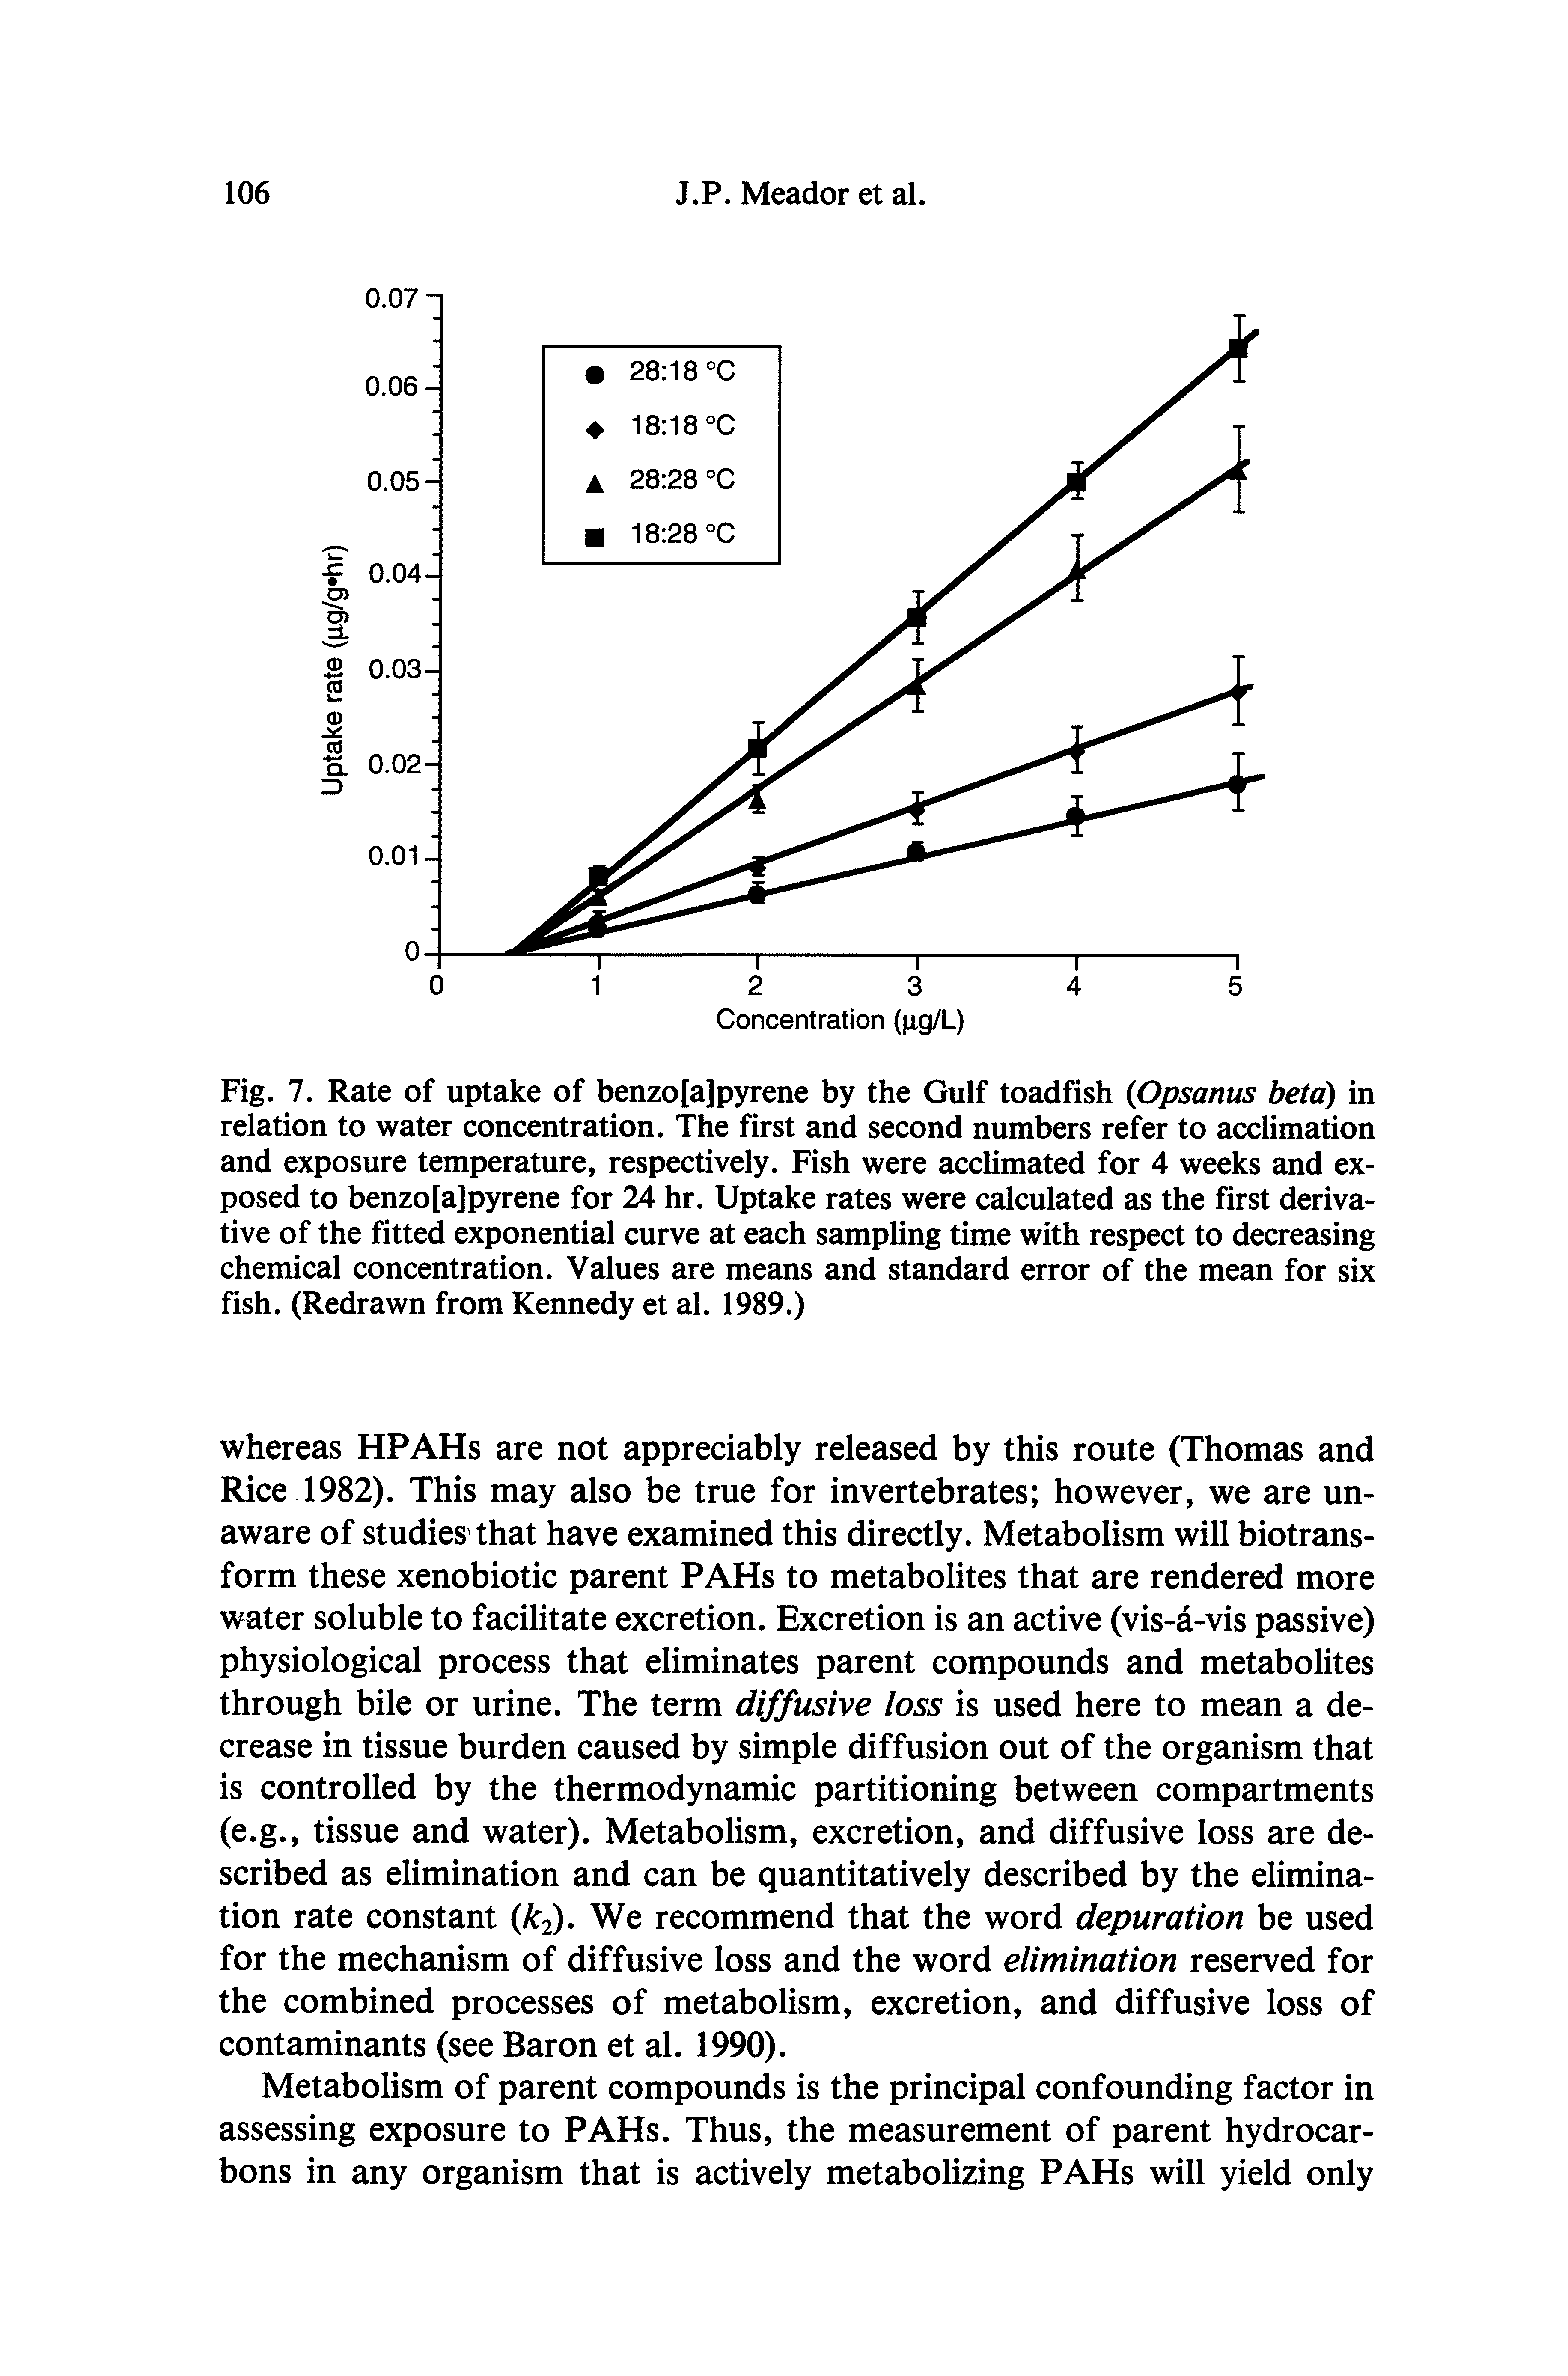 Fig. 7. Rate of uptake of benzo[a]pyrene by the Gulf toadtish Opsanus beta) in relation to water concentration. The first and second numbers refer to acclimation and exposure temperature, respectively. Fish were acclimated for 4 weeks and exposed to benzo[a]pyrene for 24 hr. Uptake rates were calculated as the first derivative of the fitted exponential curve at each sampling time with respect to decreasing chemical concentration. Values are means and standard error of the mean for six fish. (Redrawn from Kennedy et al. 1989.)...